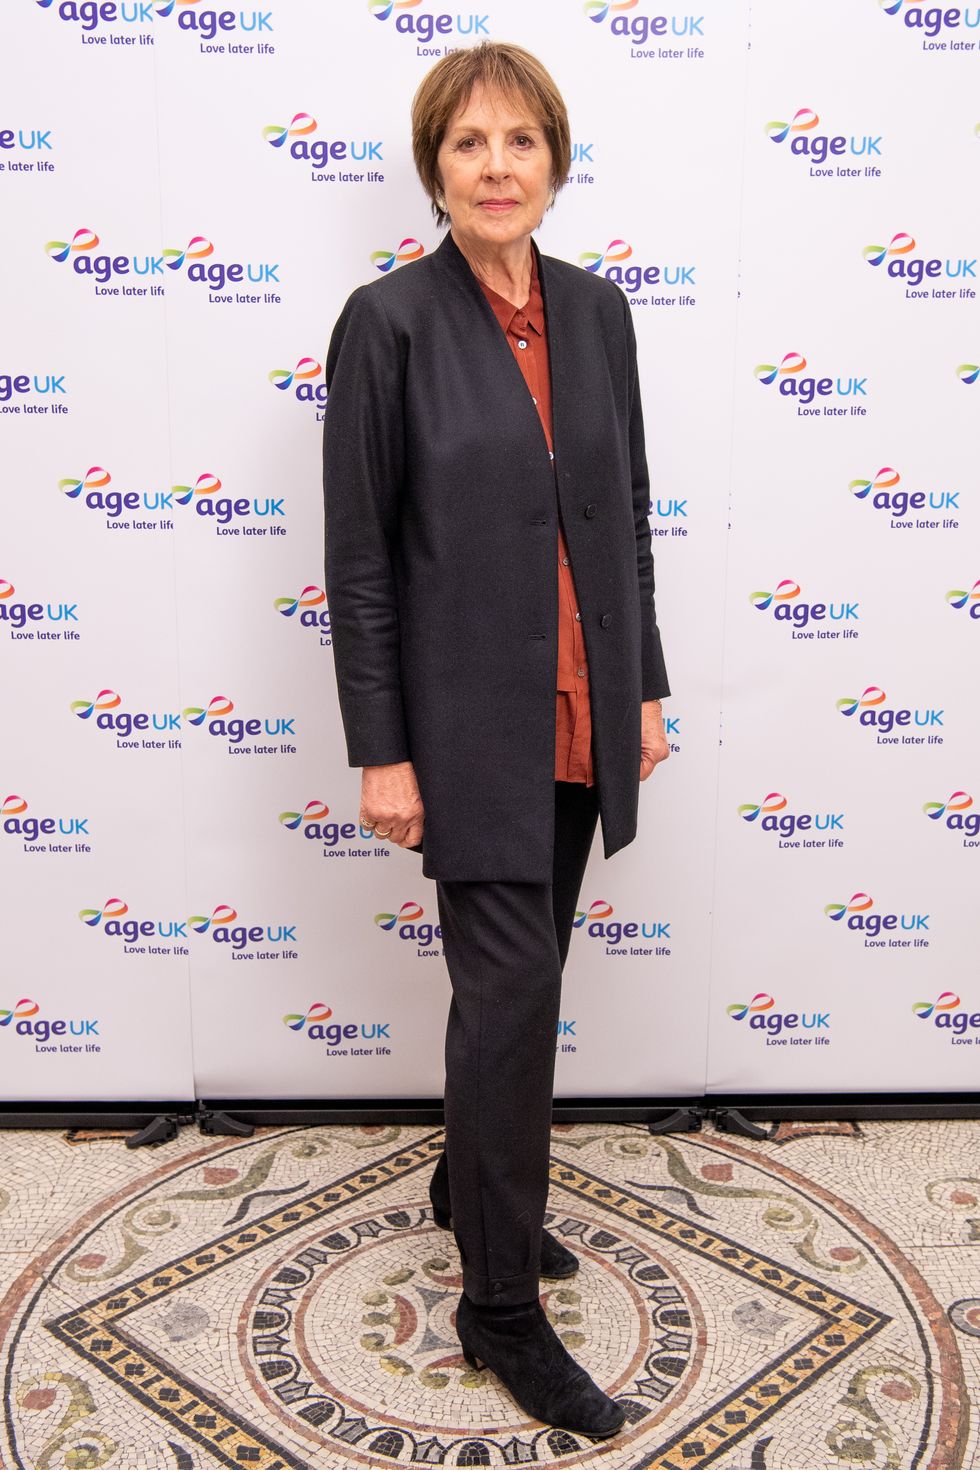 Penelope Wilton at Age UK’s Love Christmas carol concert - St Paul's Cathedral - 11th Dec 2018